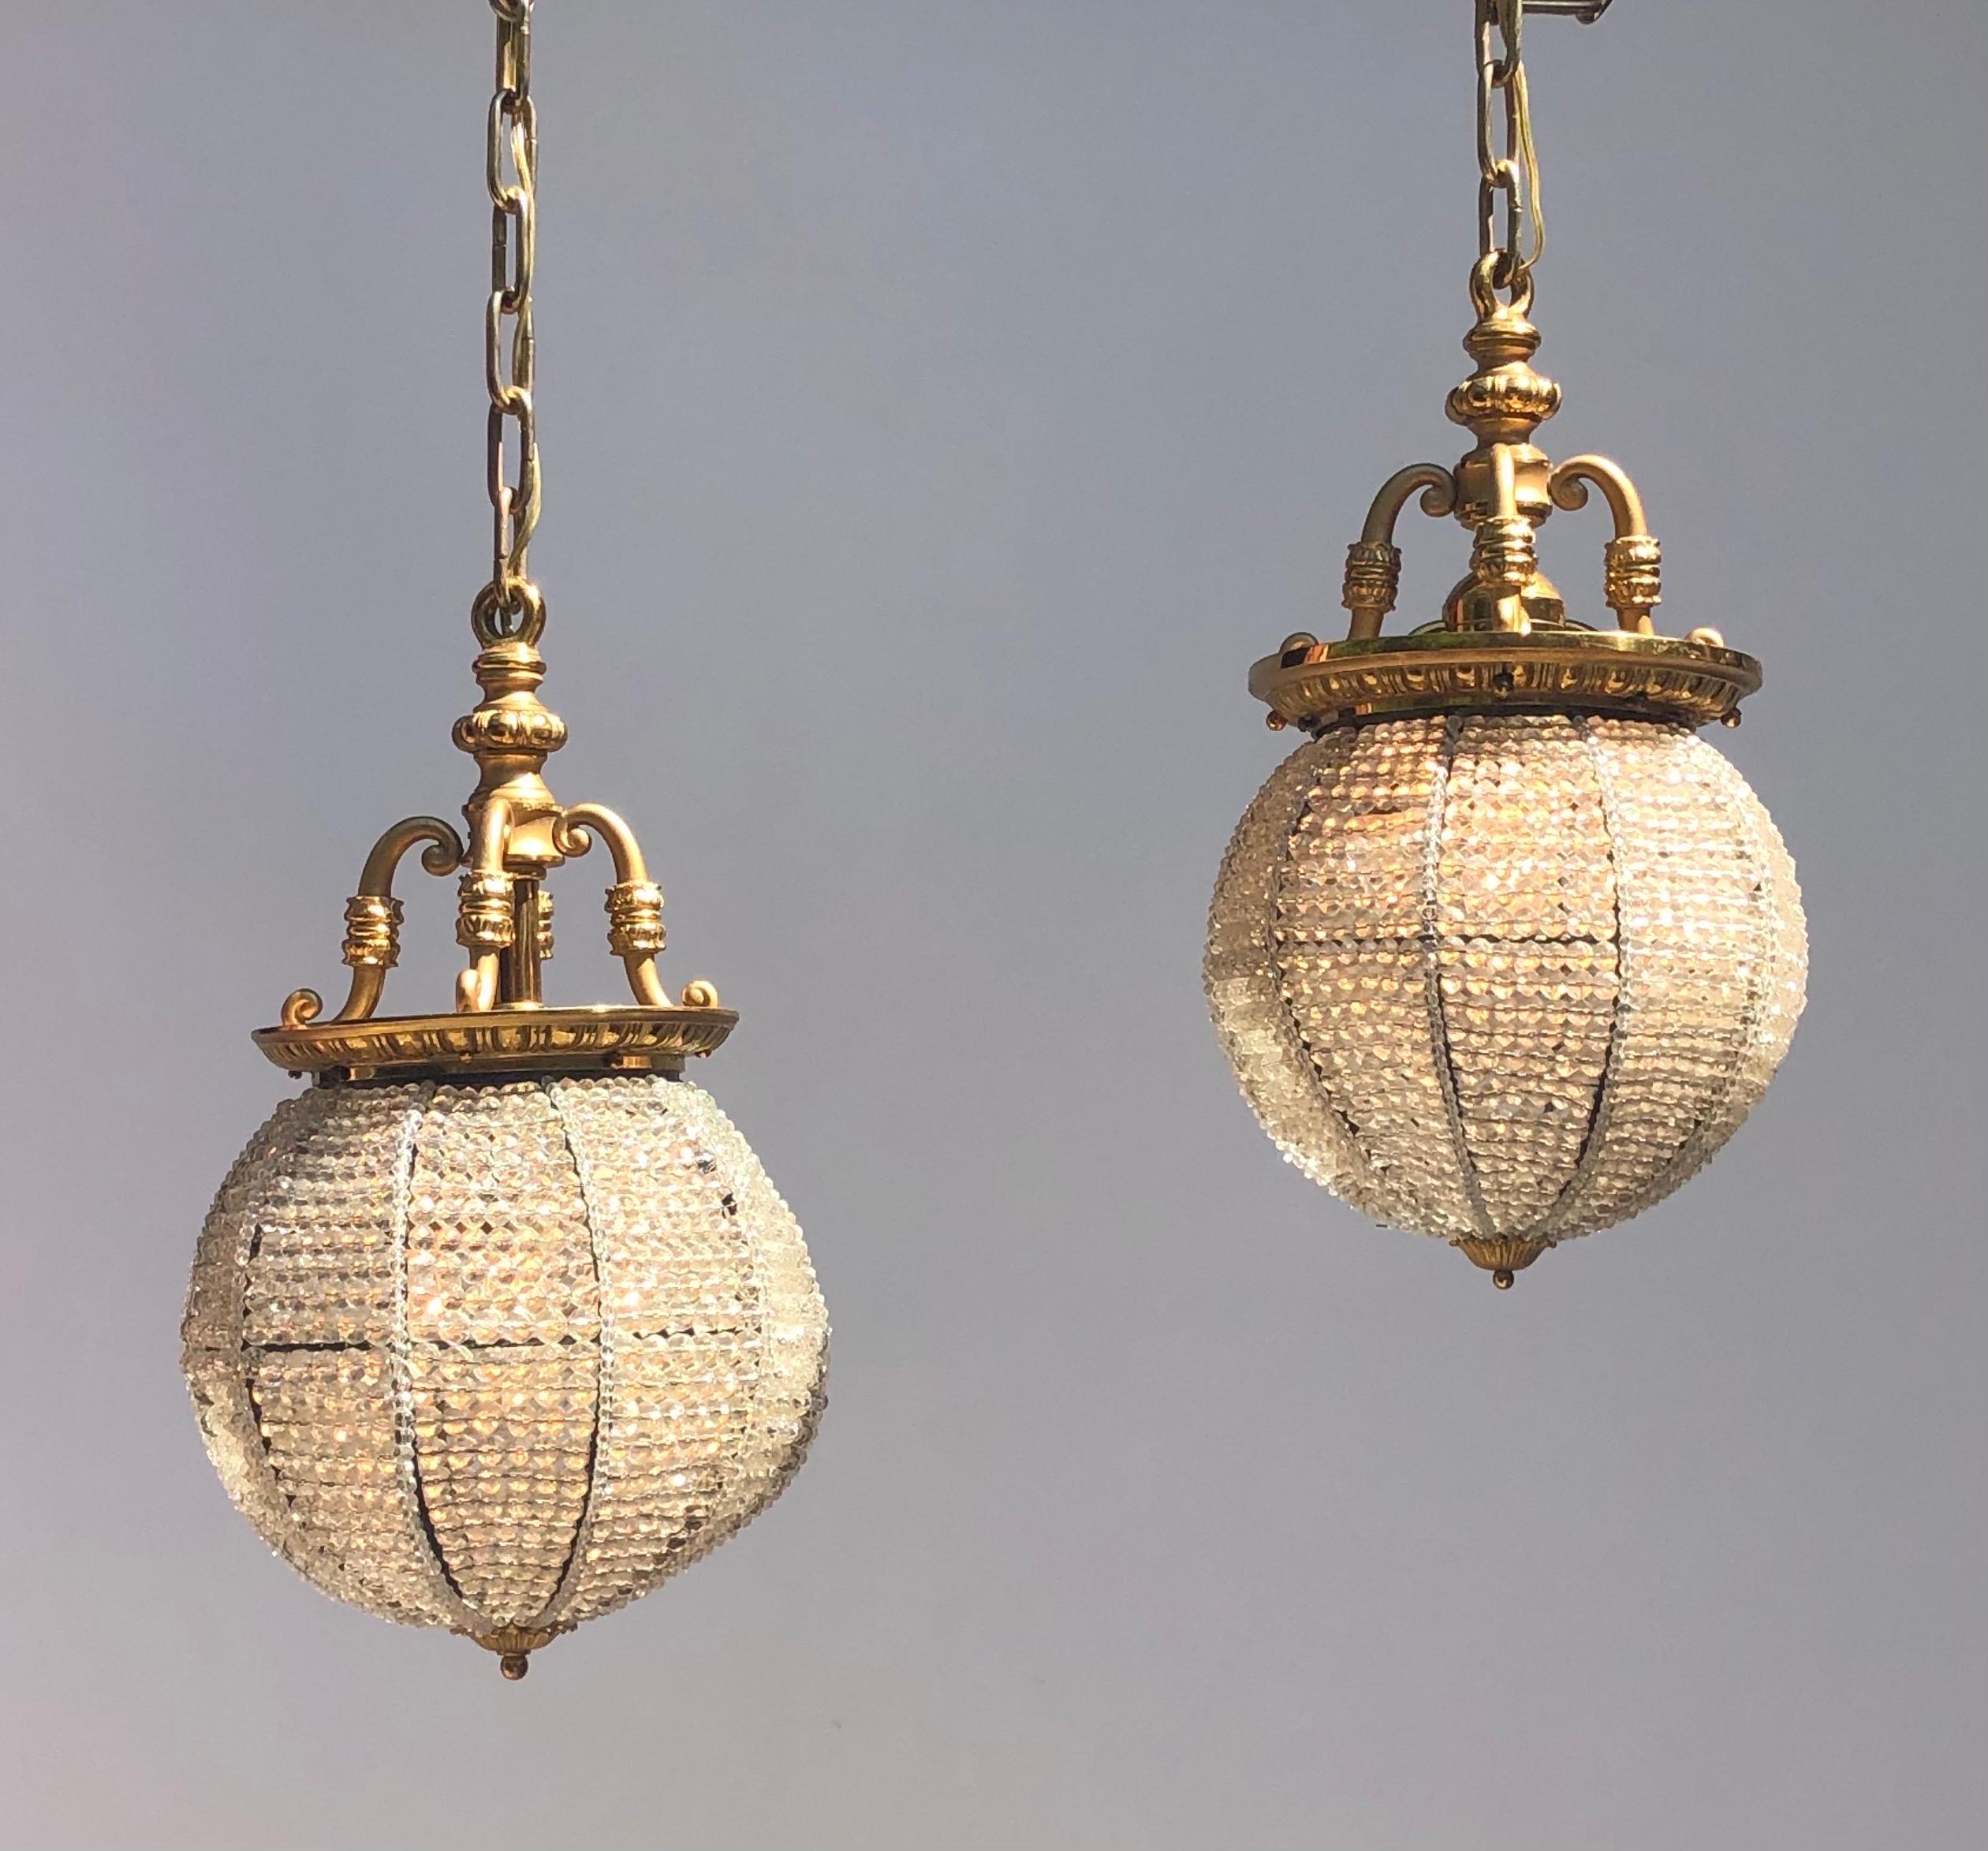 A Magnificent pair of Hand-strung Cut Crystal Sphere Pendants adorned with an elegant matte and high gilt gold finish. This pair of Belle Epoque Cut Crystal Beaded Sphere Chandeliers hang from a Gilt Bronze Egg-and-Dart Ring Console Suspended by